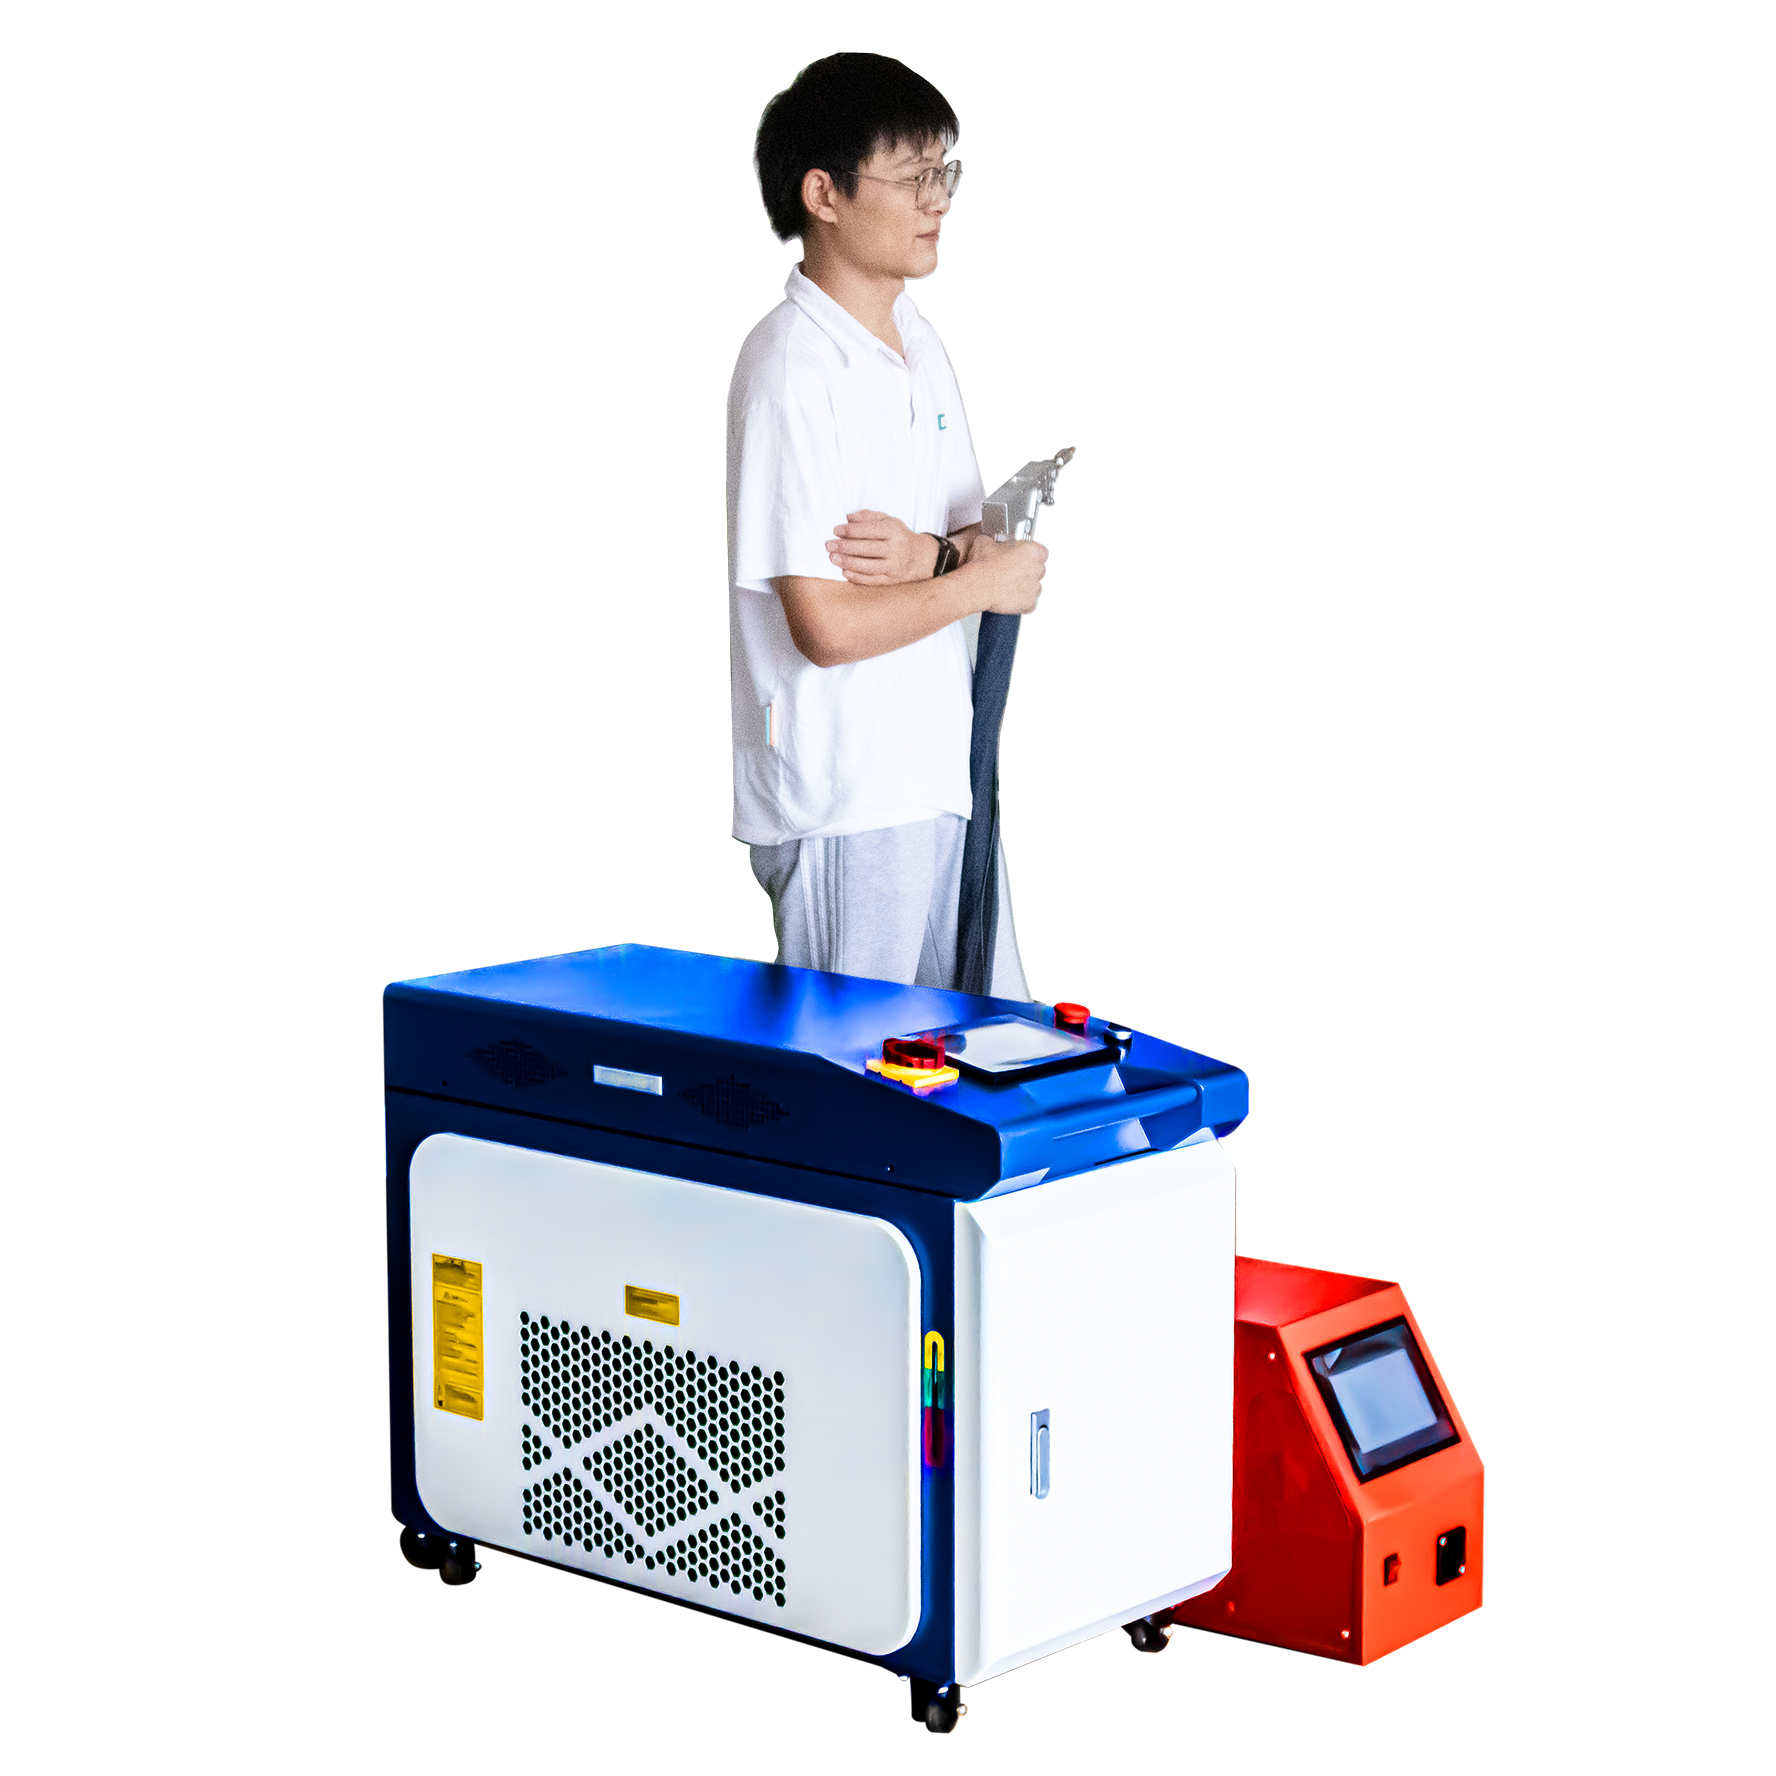 The protective lens of the laser welding machine is always burned out. How to solve this problem? - News - 1